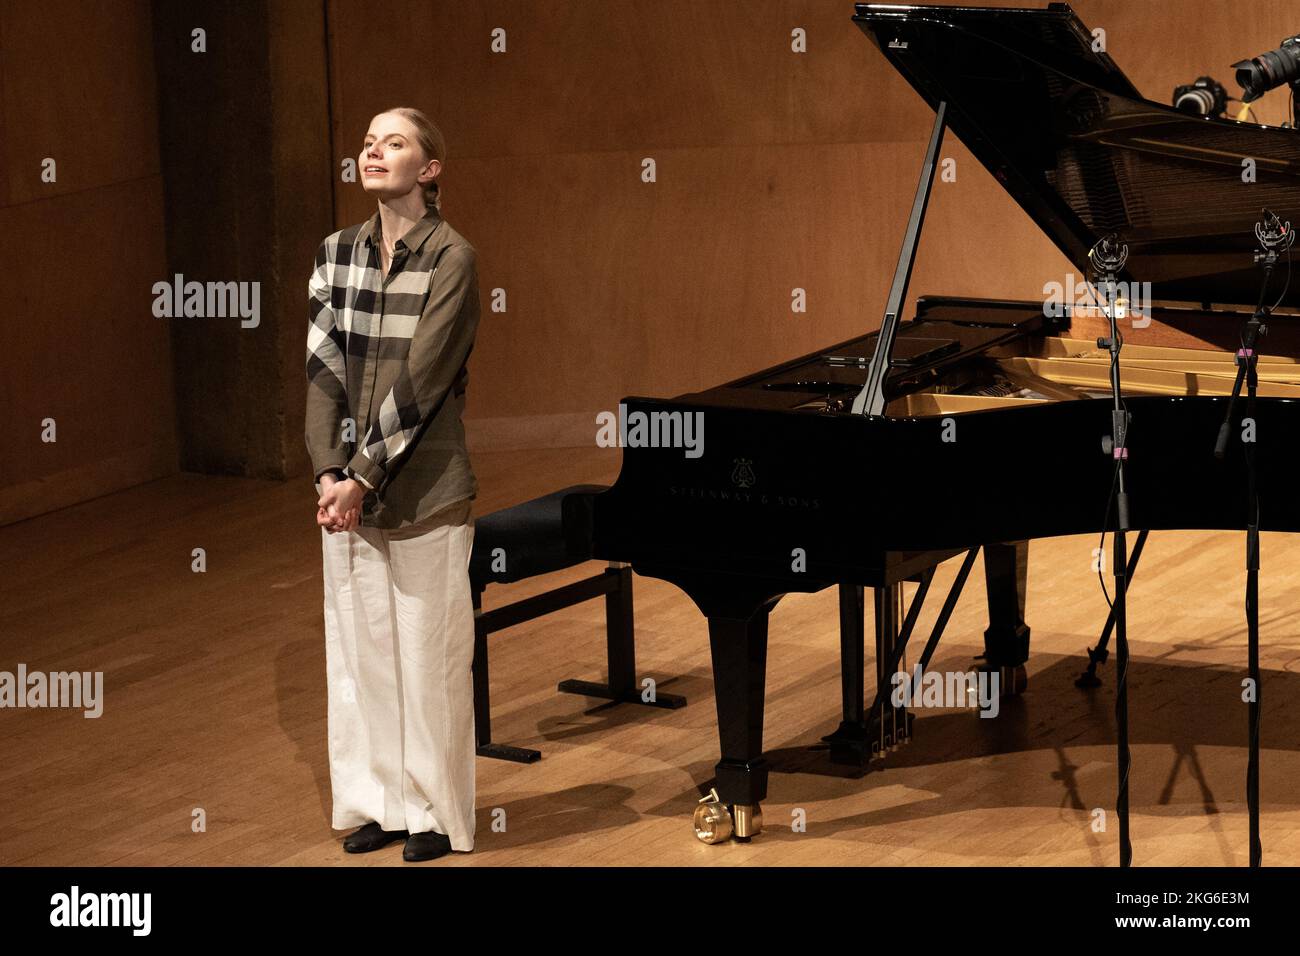 EXCLUSIVE - Ukrainian pianist, Svetlana Andreeva performs on stage at the Salle Cortot, on November 21, 2022 in Paris, France. Photo by David Niviere/ABACAPRESS.COM Stock Photo